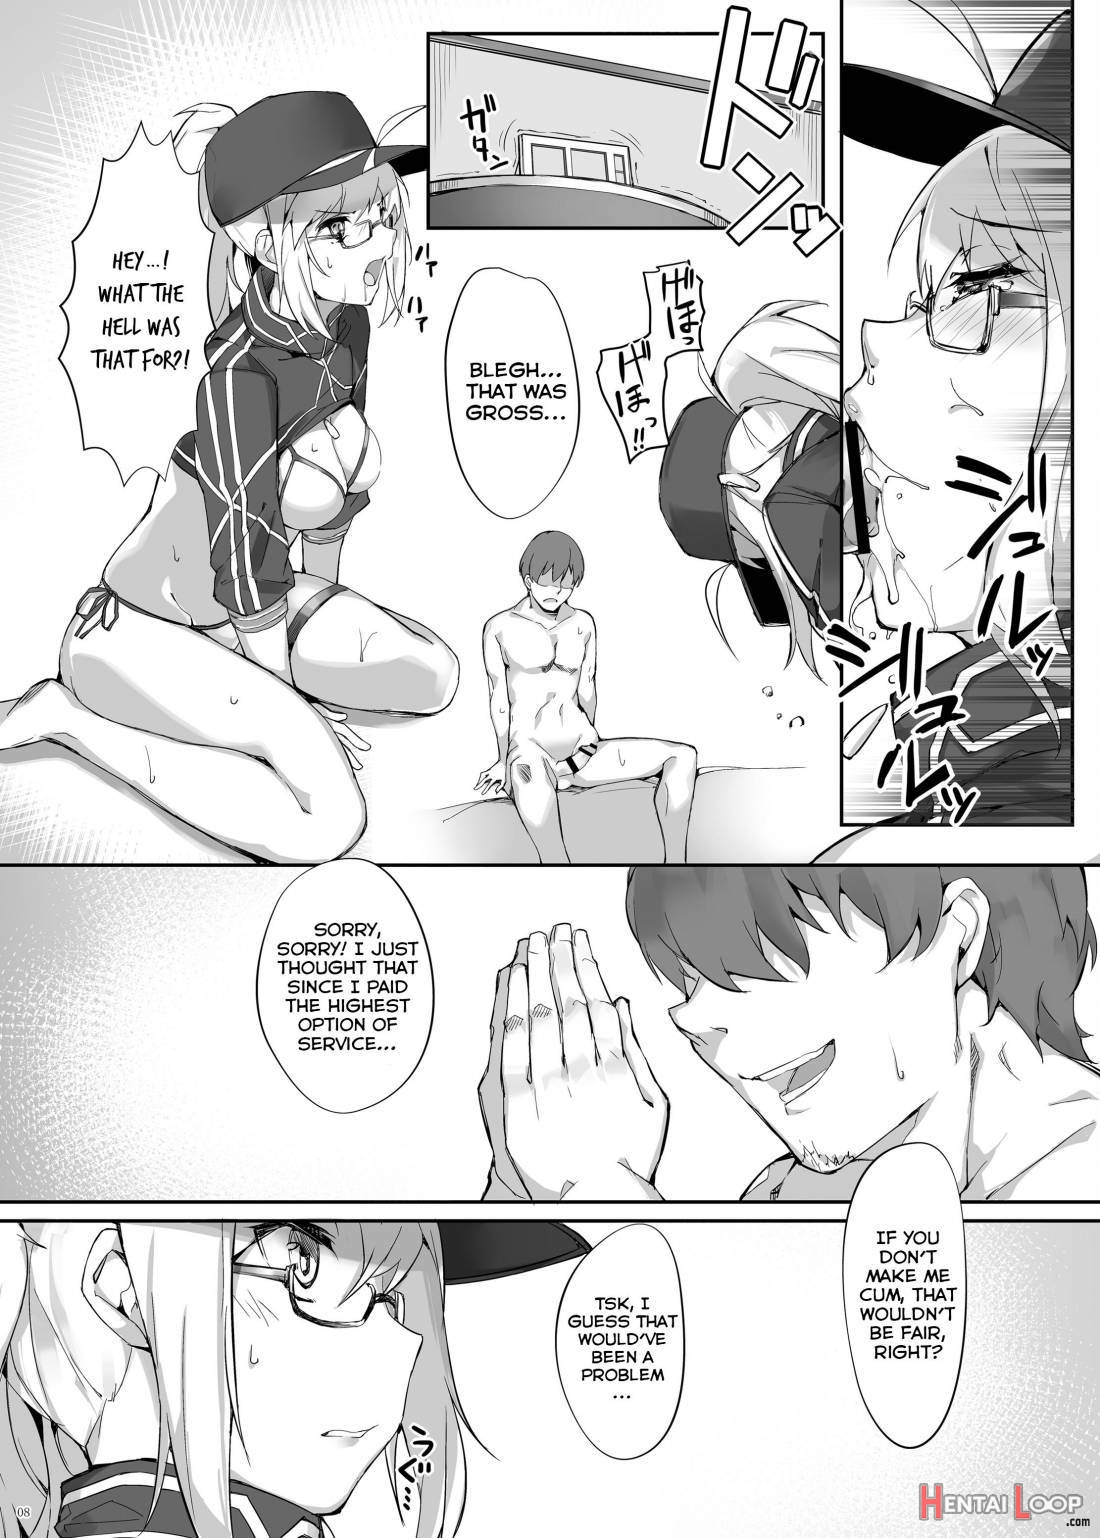 Omatase!! Chaldelivery page 7